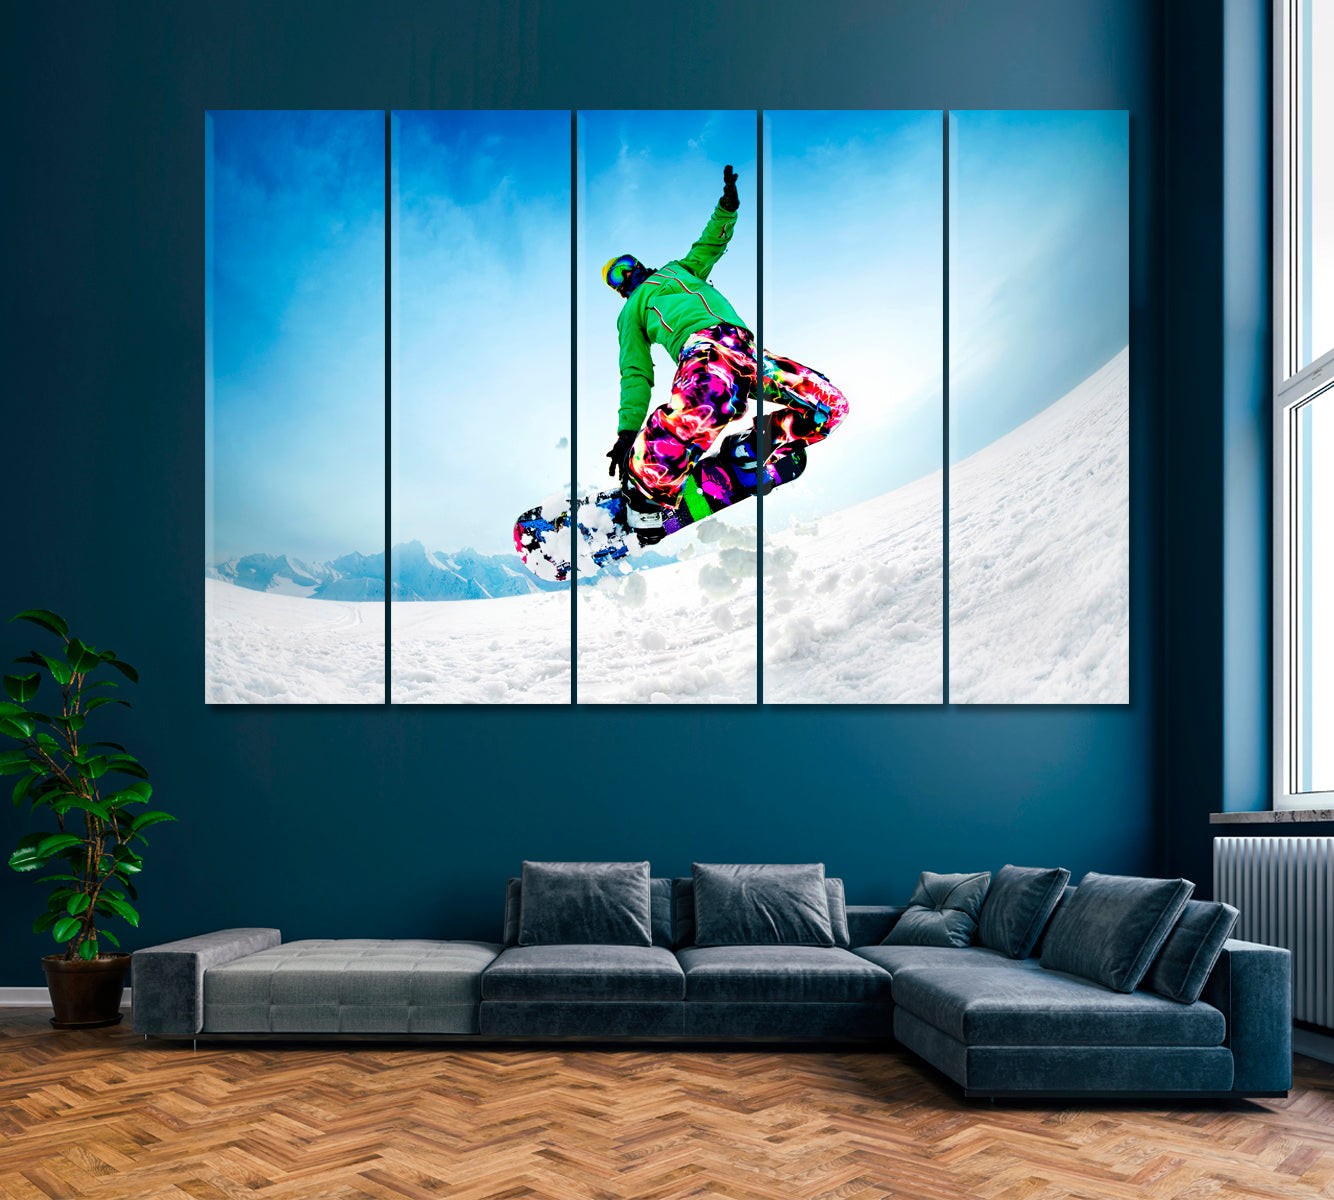 Snowboarder Canvas Print ArtLexy 5 Panels 36"x24" inches 